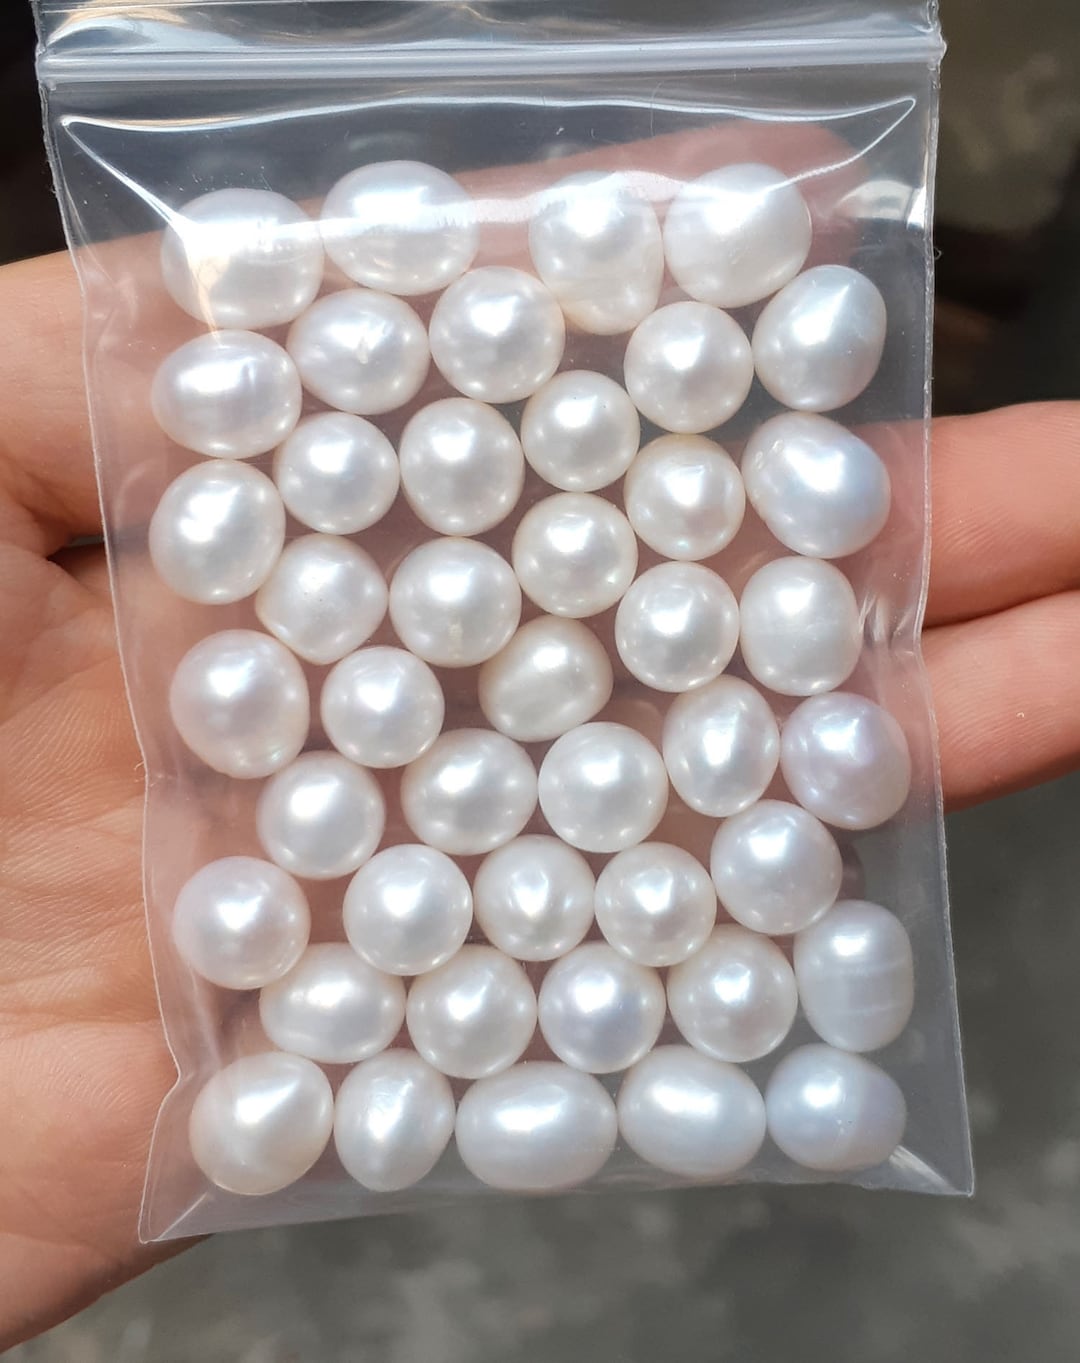 7 10mm Undrilled Pearl Beads Natural Pearl Assorted Pearls No Hole